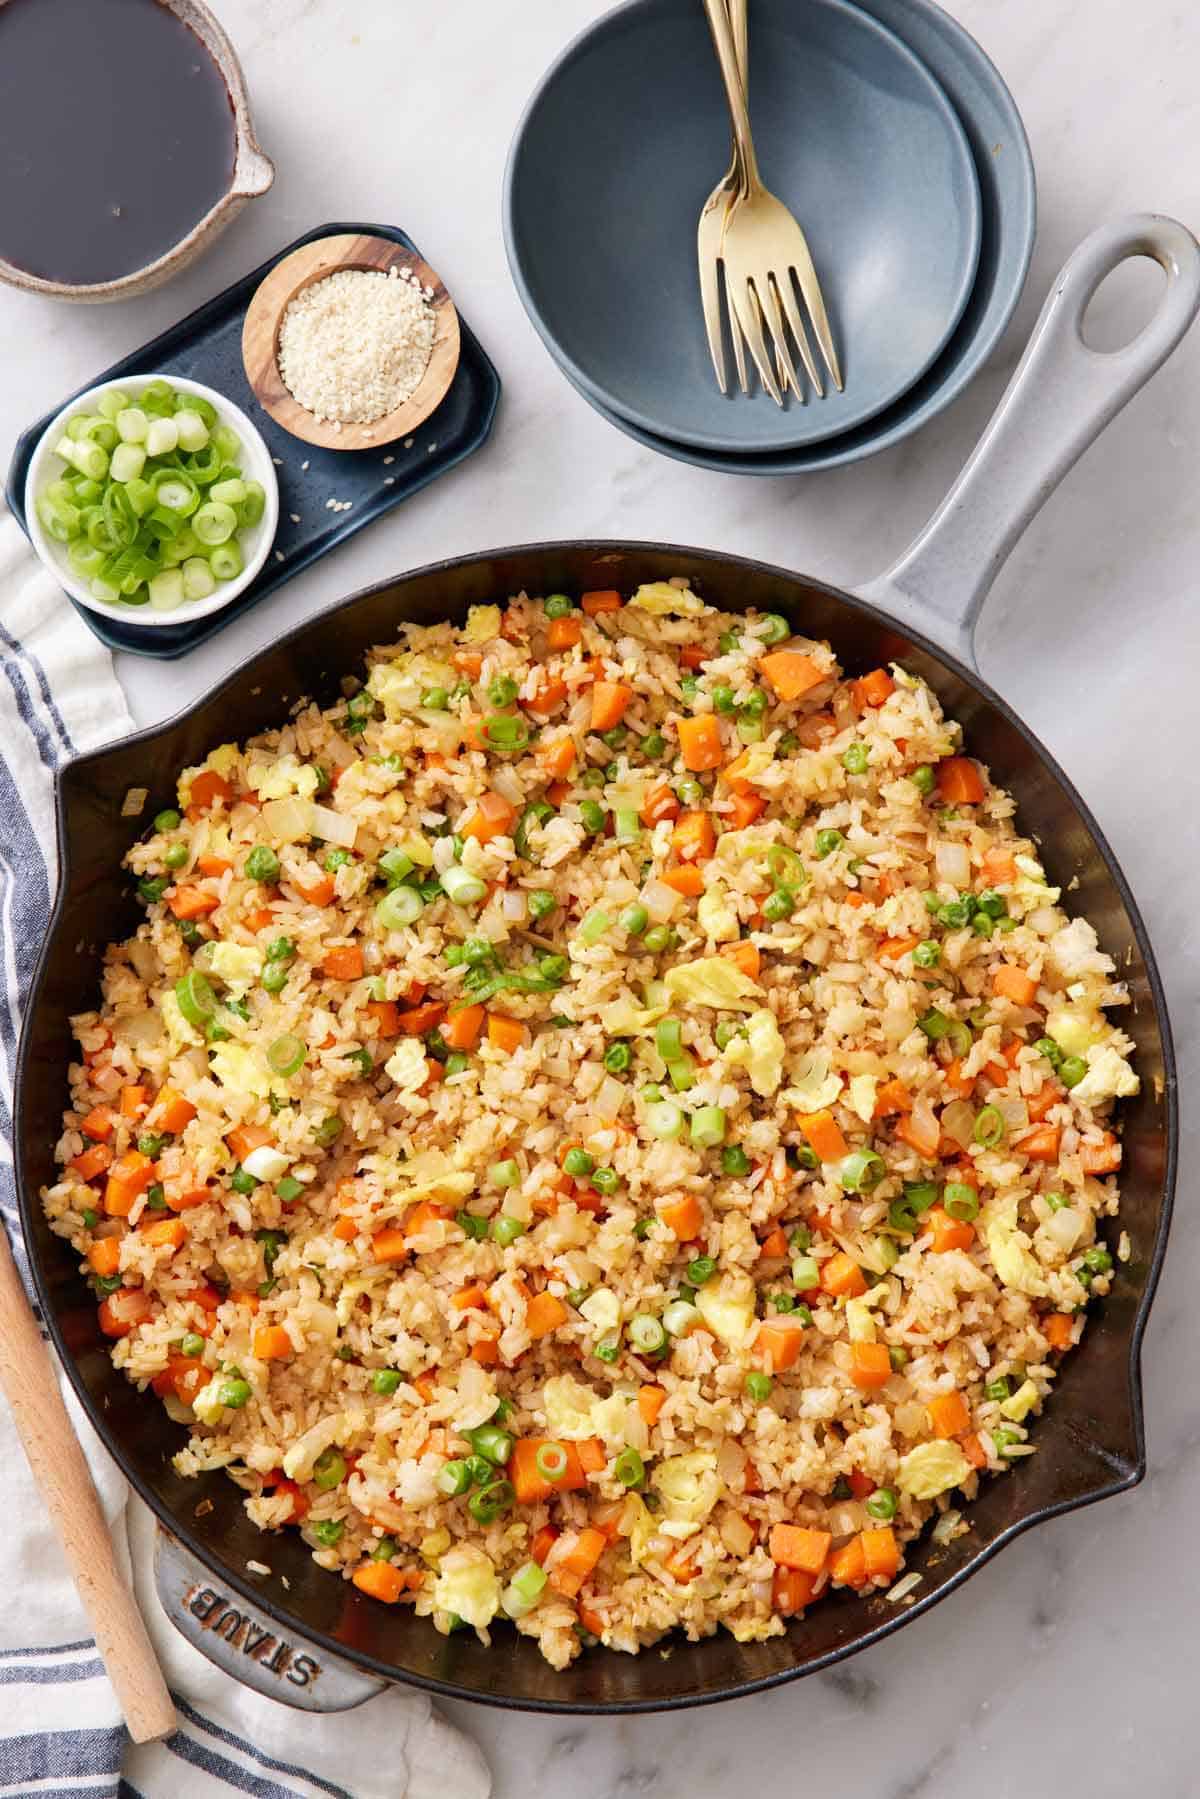 An overhead view of a skillet of fried rice with a stack of bowls, forks, and bowls of garnishes on the side.